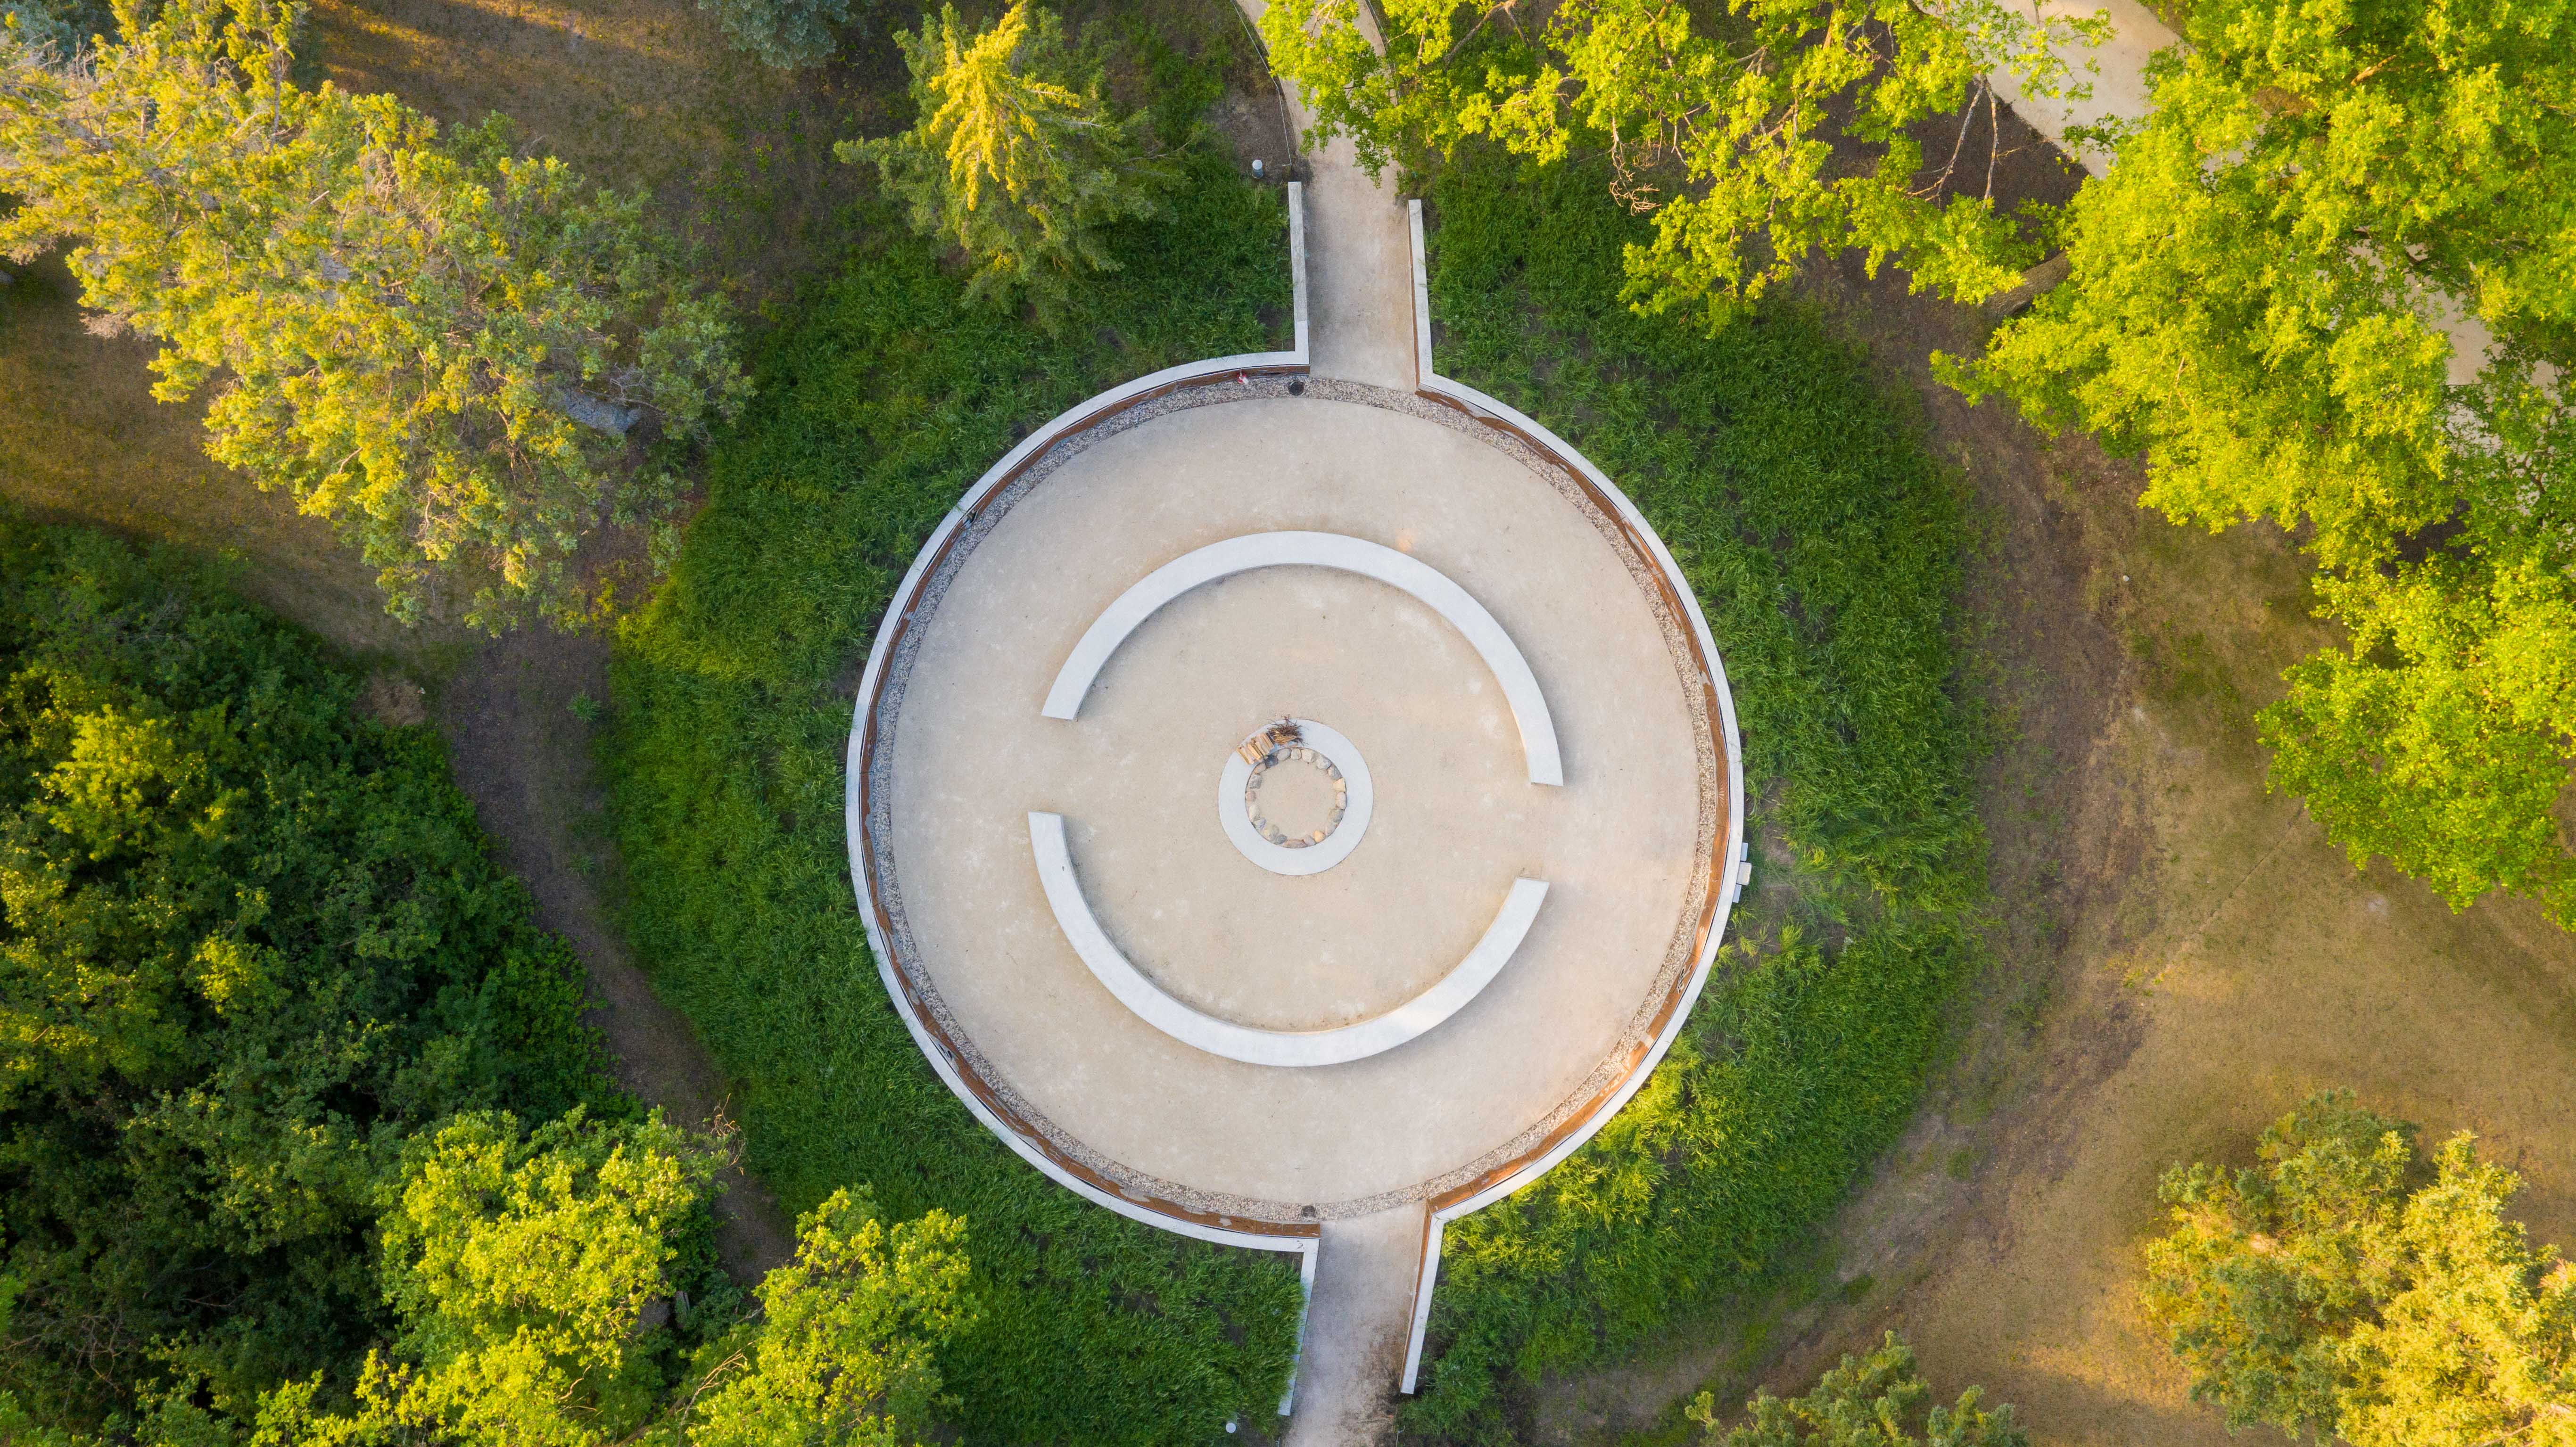 Aerial view of the fire node in the Indigenous Peoples Garden, 2021. Credit: Assiniboine Park Conservancy